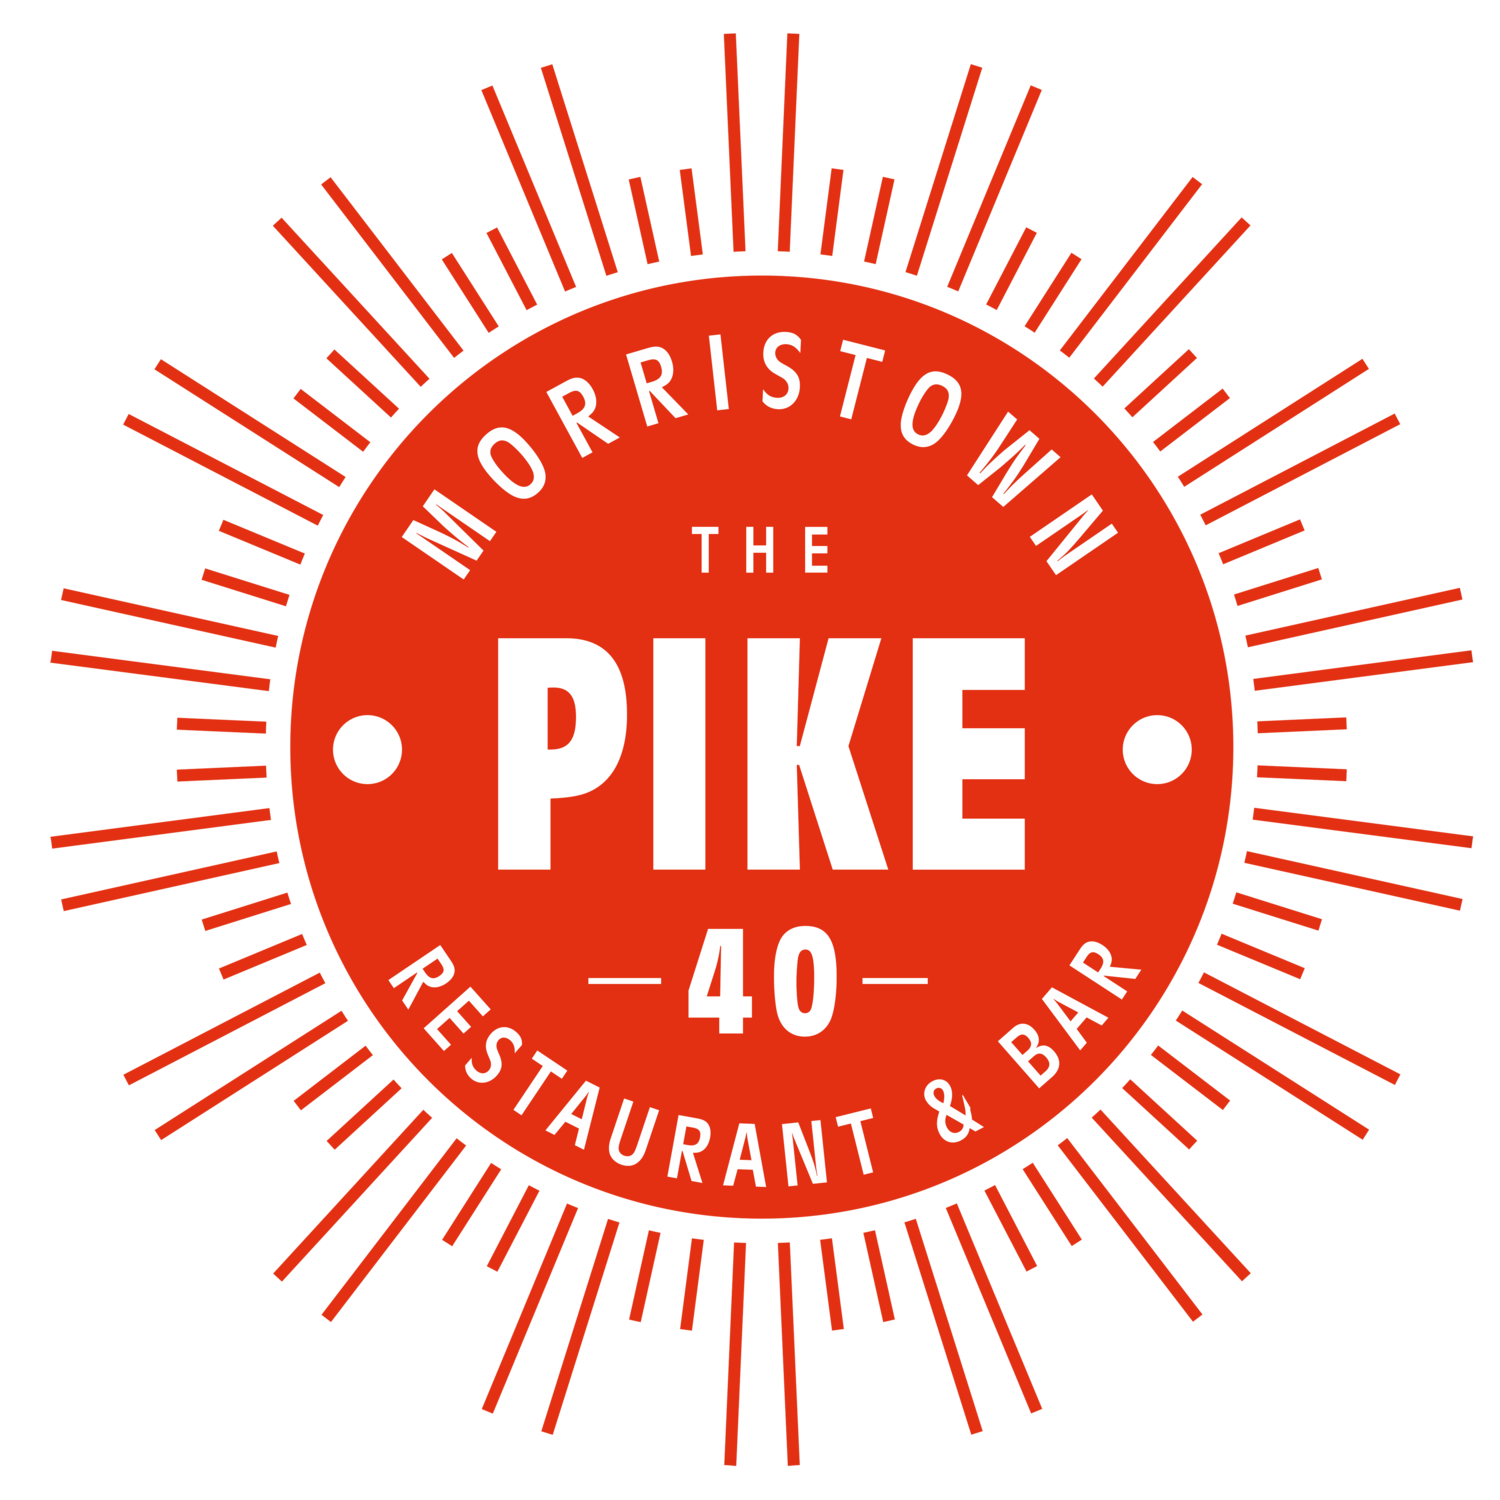 The Pike 40 - Morristown, OH Restaurant and Bar 